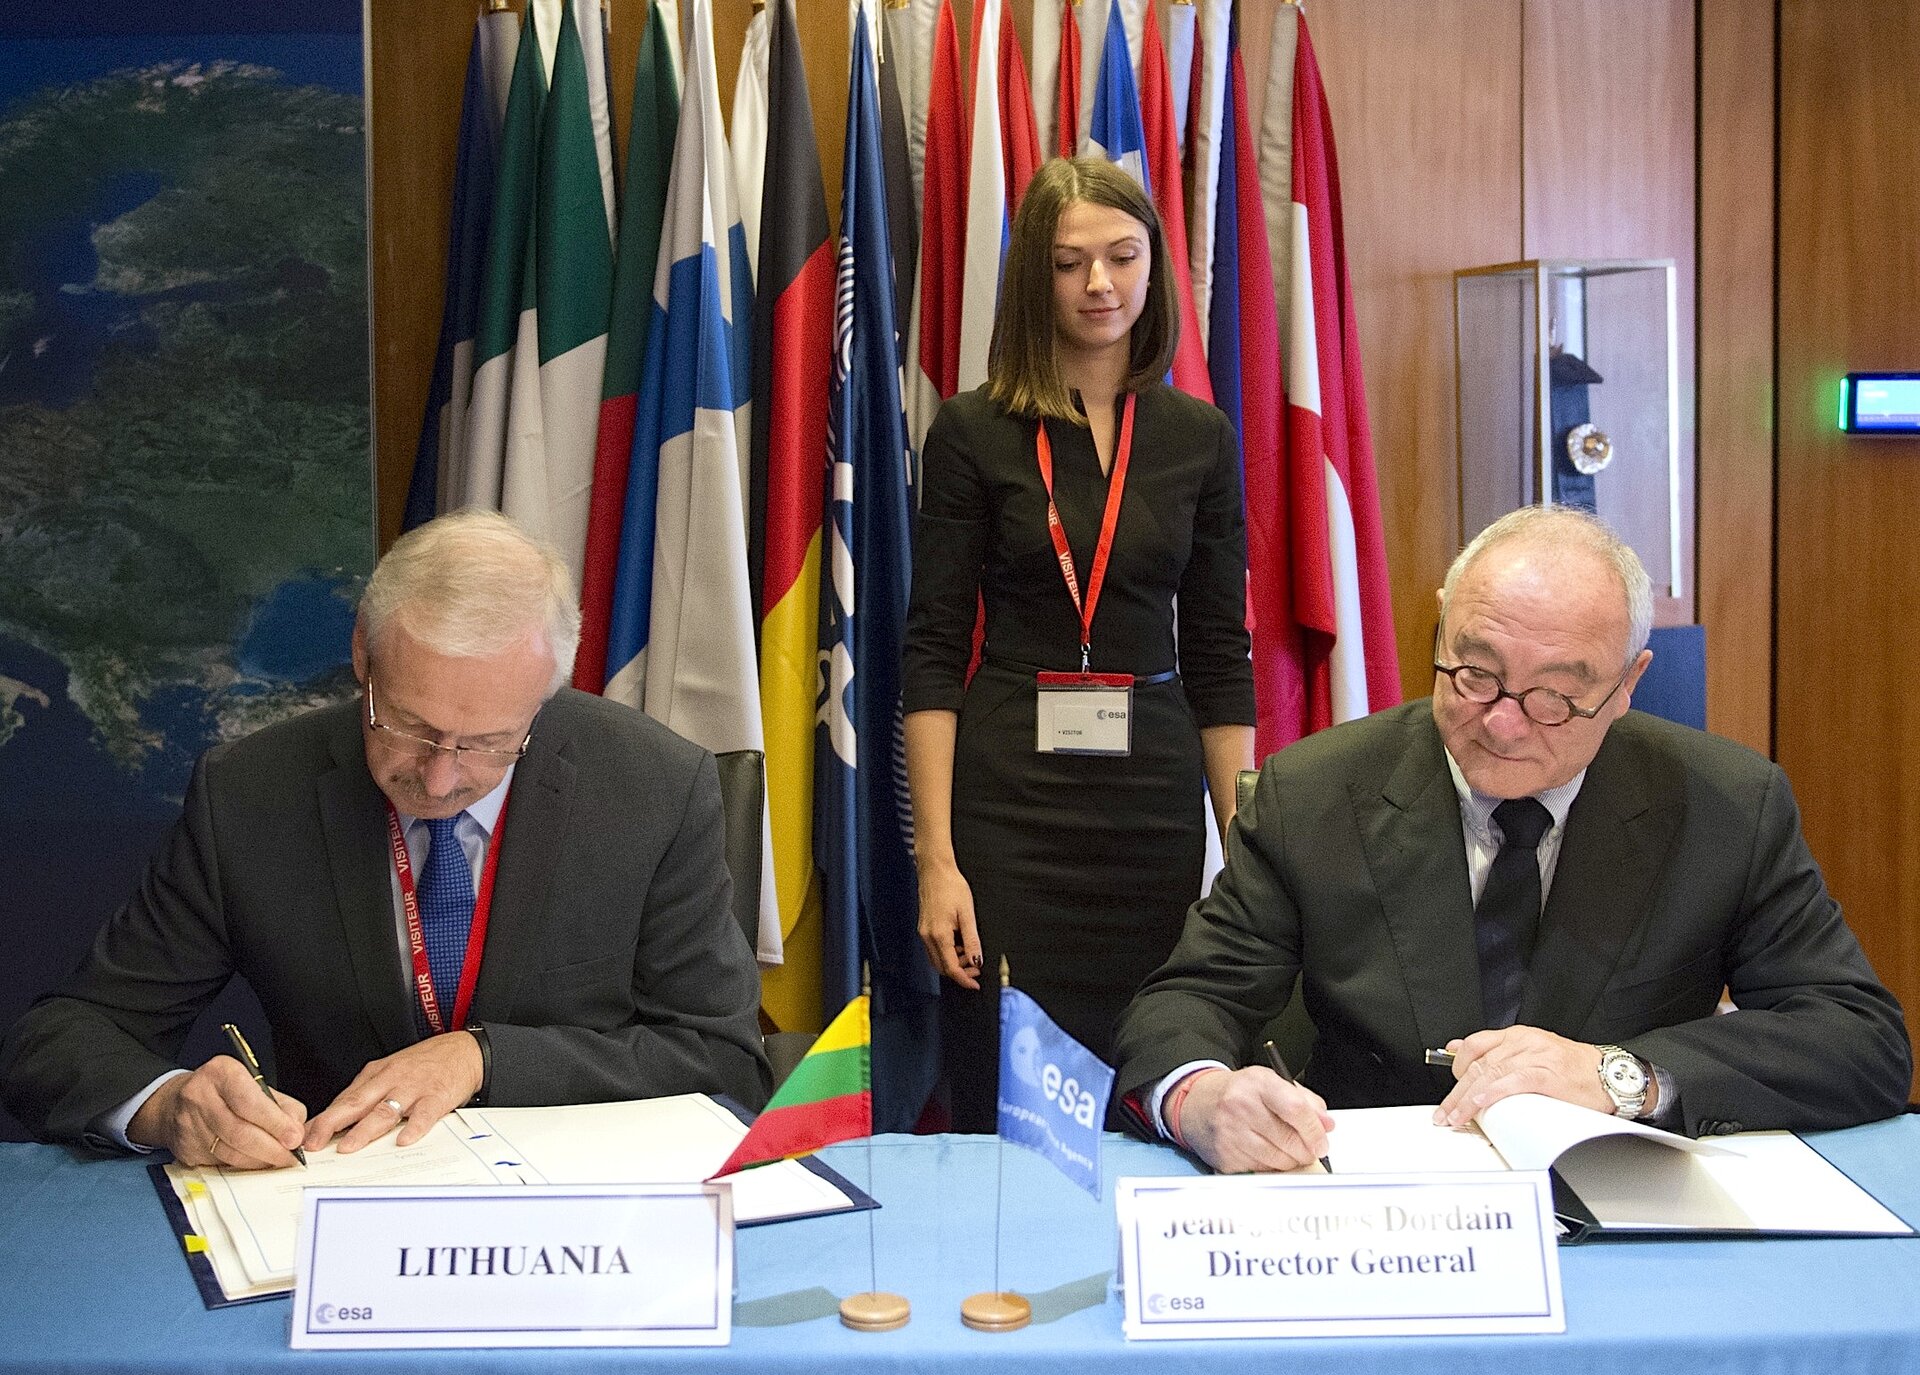 Signing of Lithuania ECS agreement